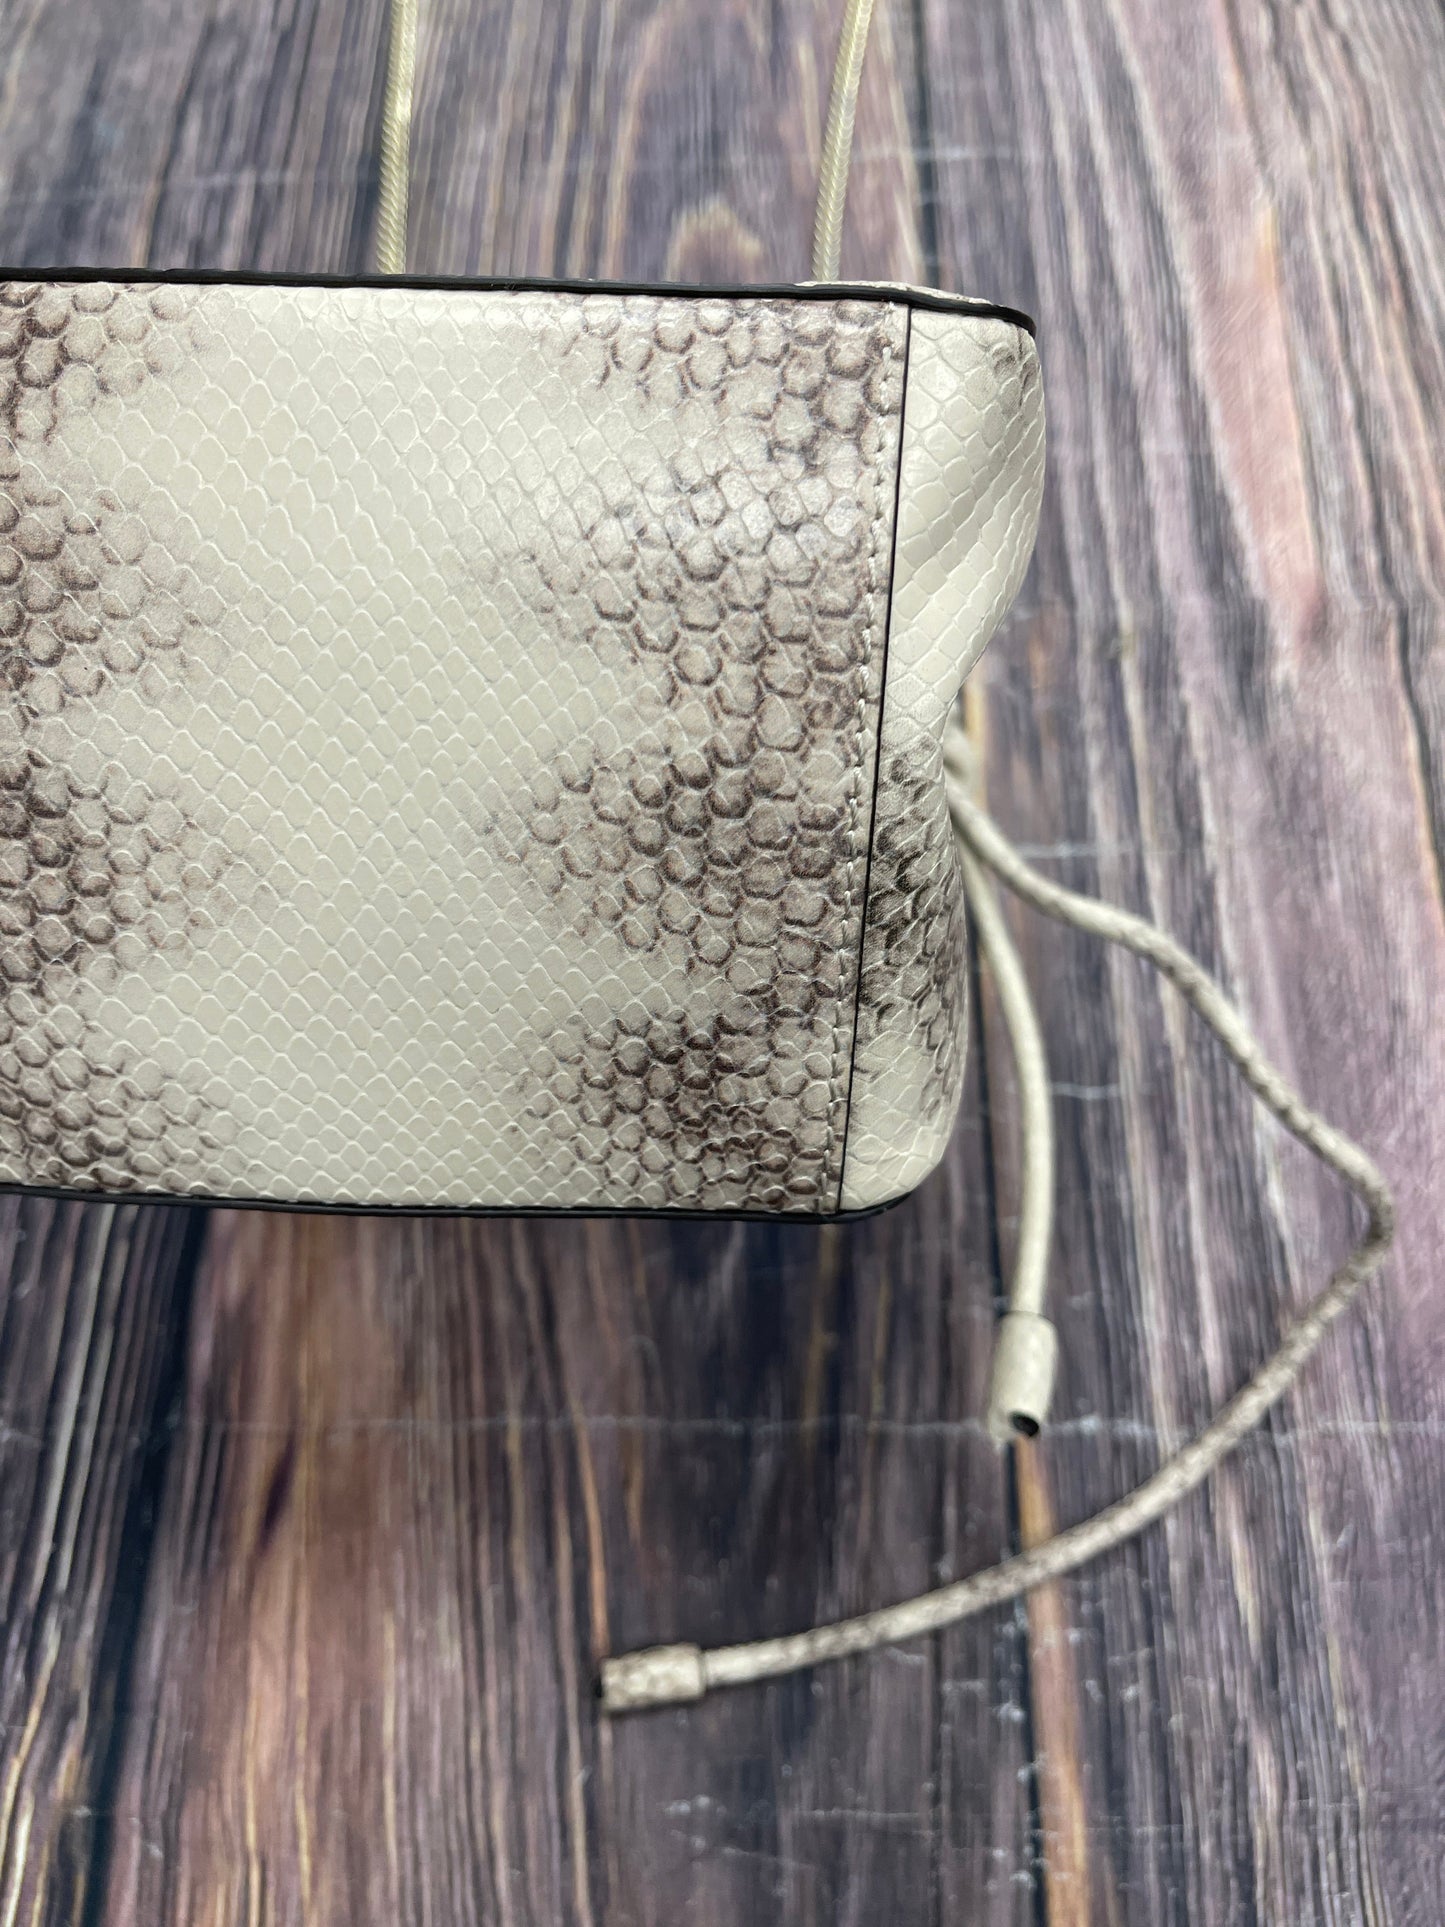 Crossbody By Vince Camuto  Size: Small